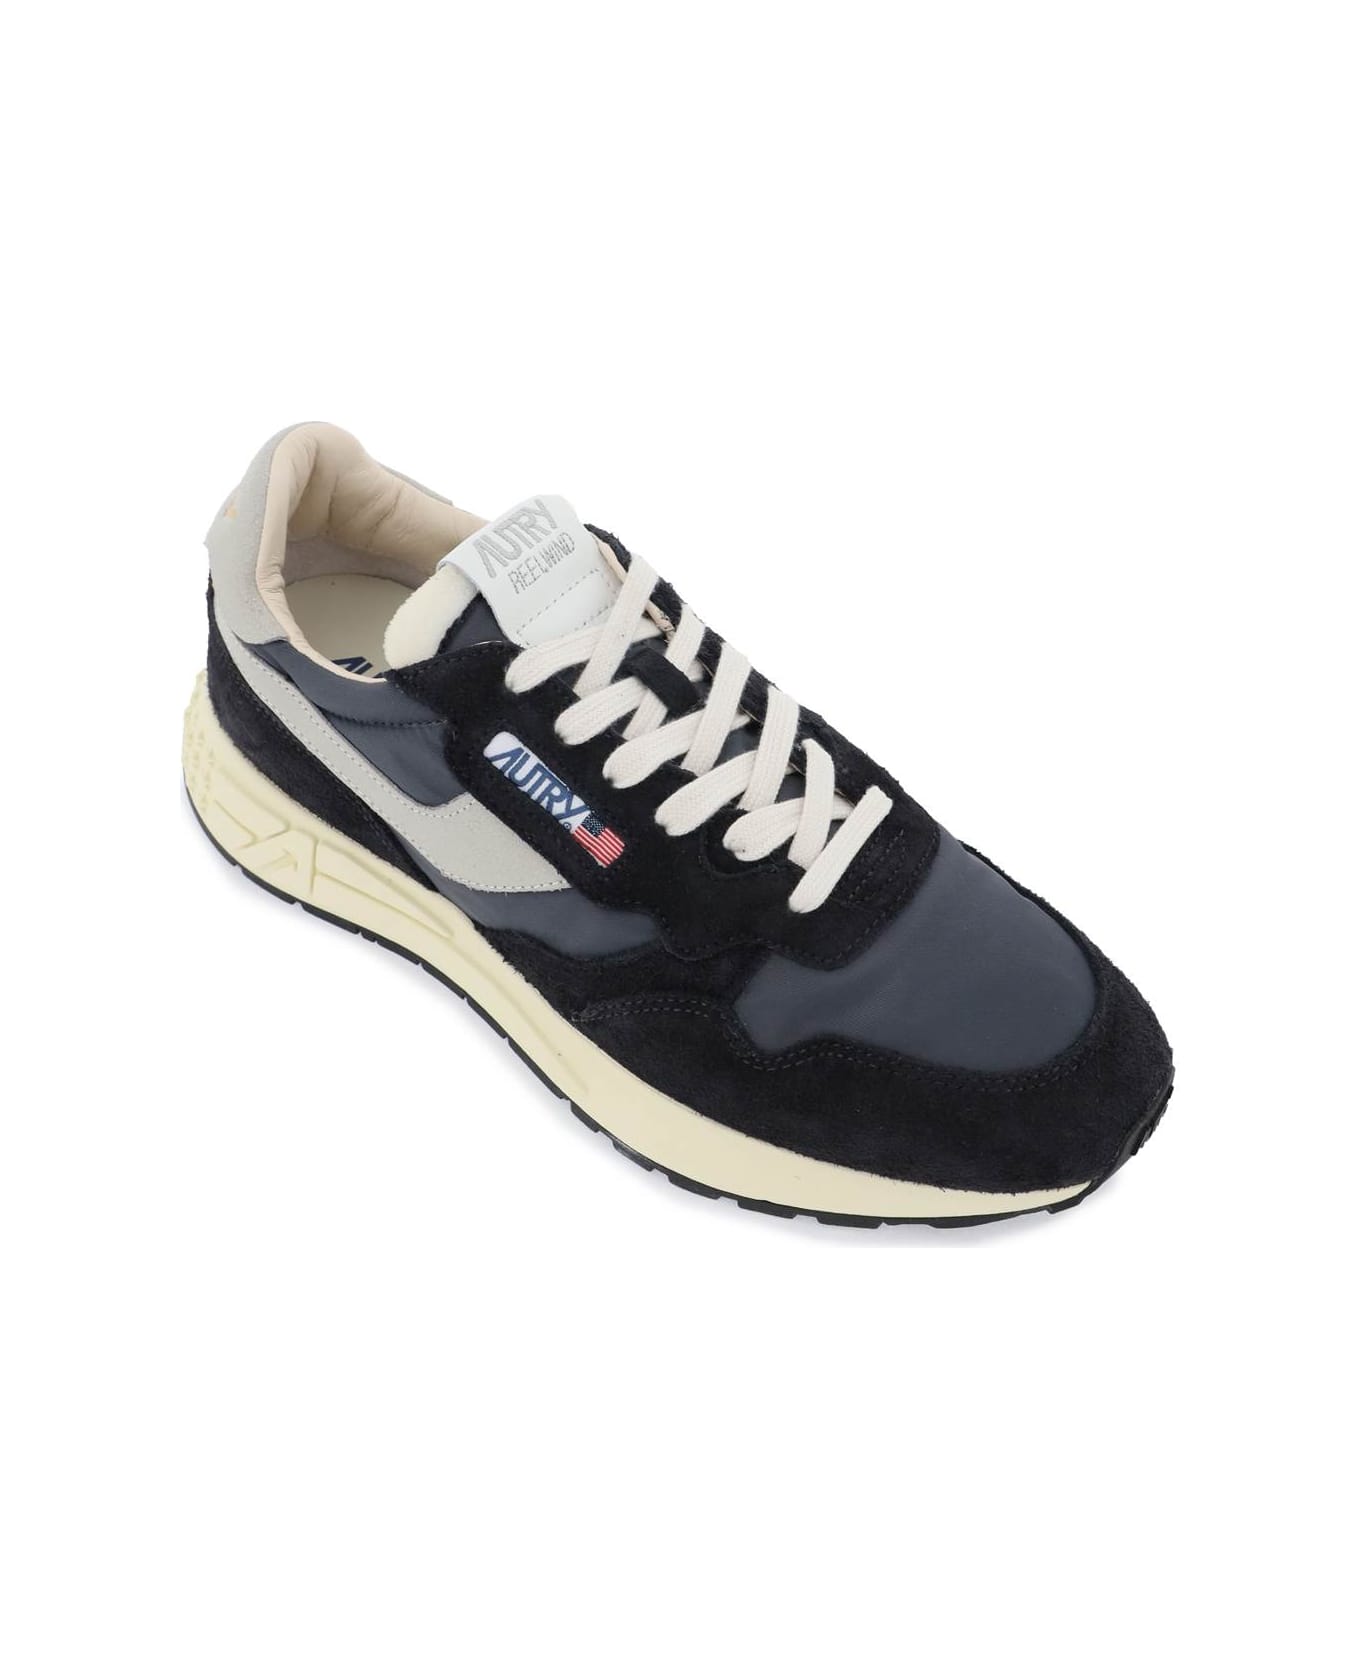 Autry Reelwind Low Sneakers In Black Nylon And Suede - Black